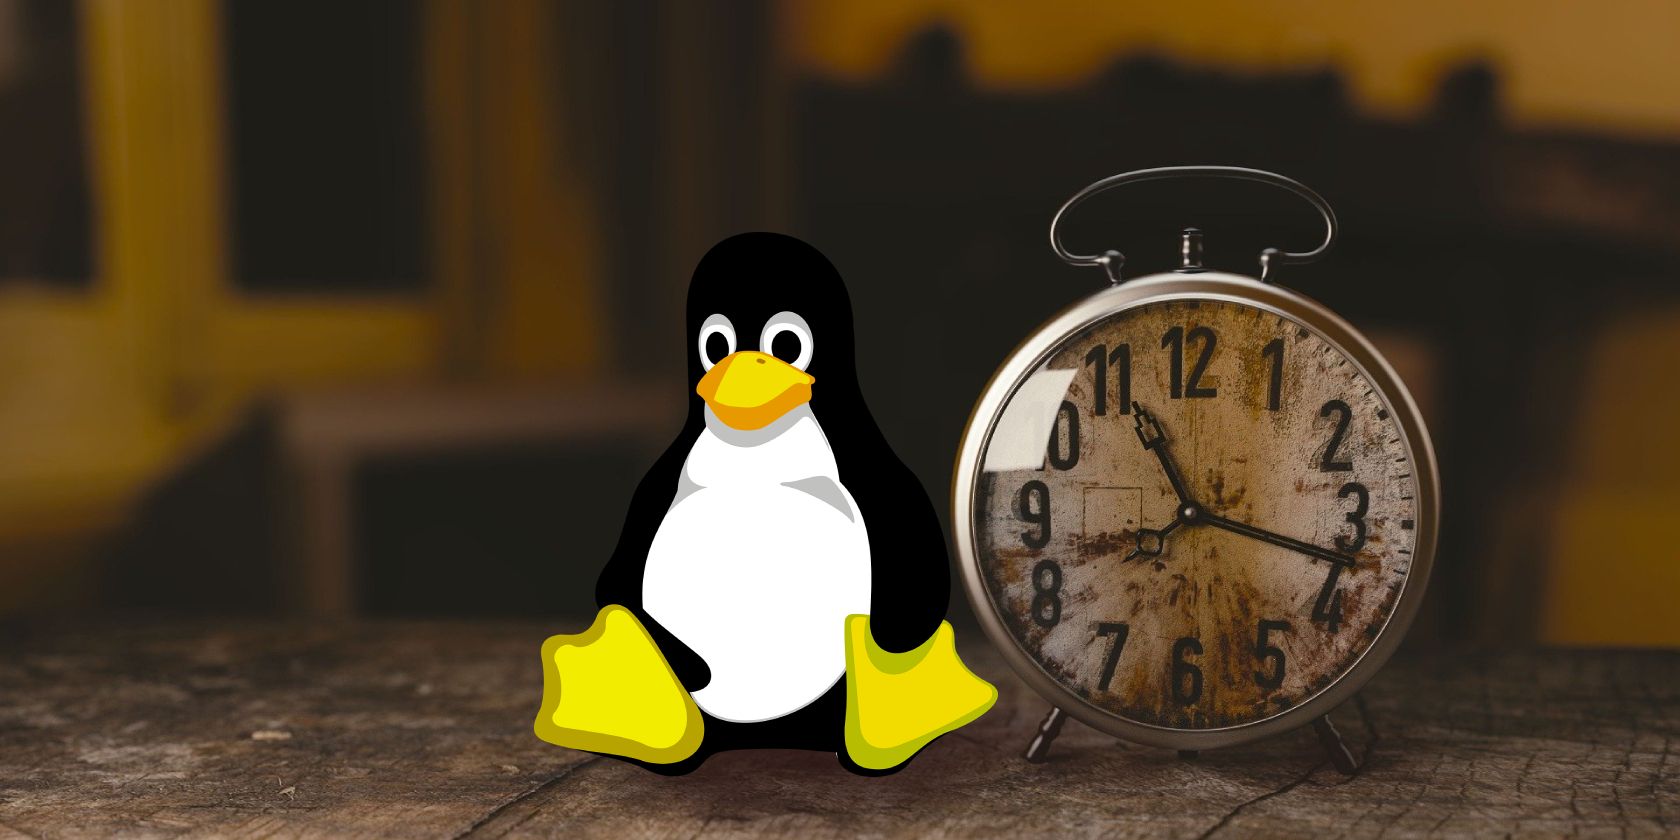 how long does it take for linux to boot